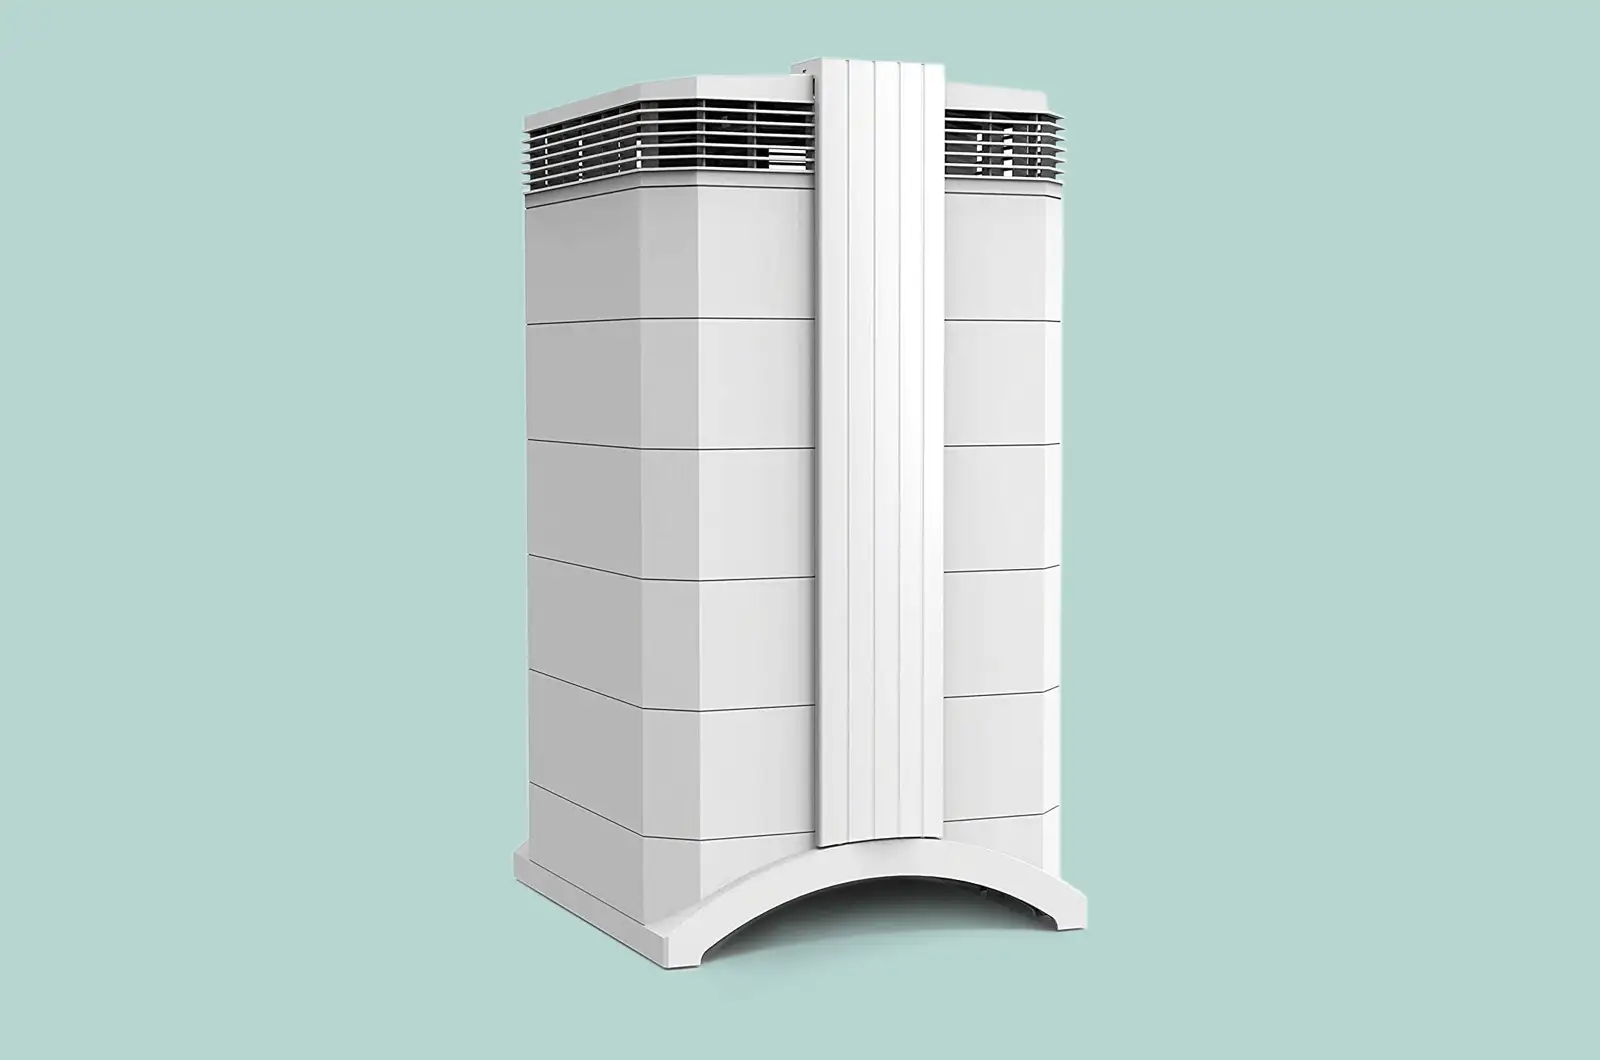 A tall, powerful air purifier sold on Amazon